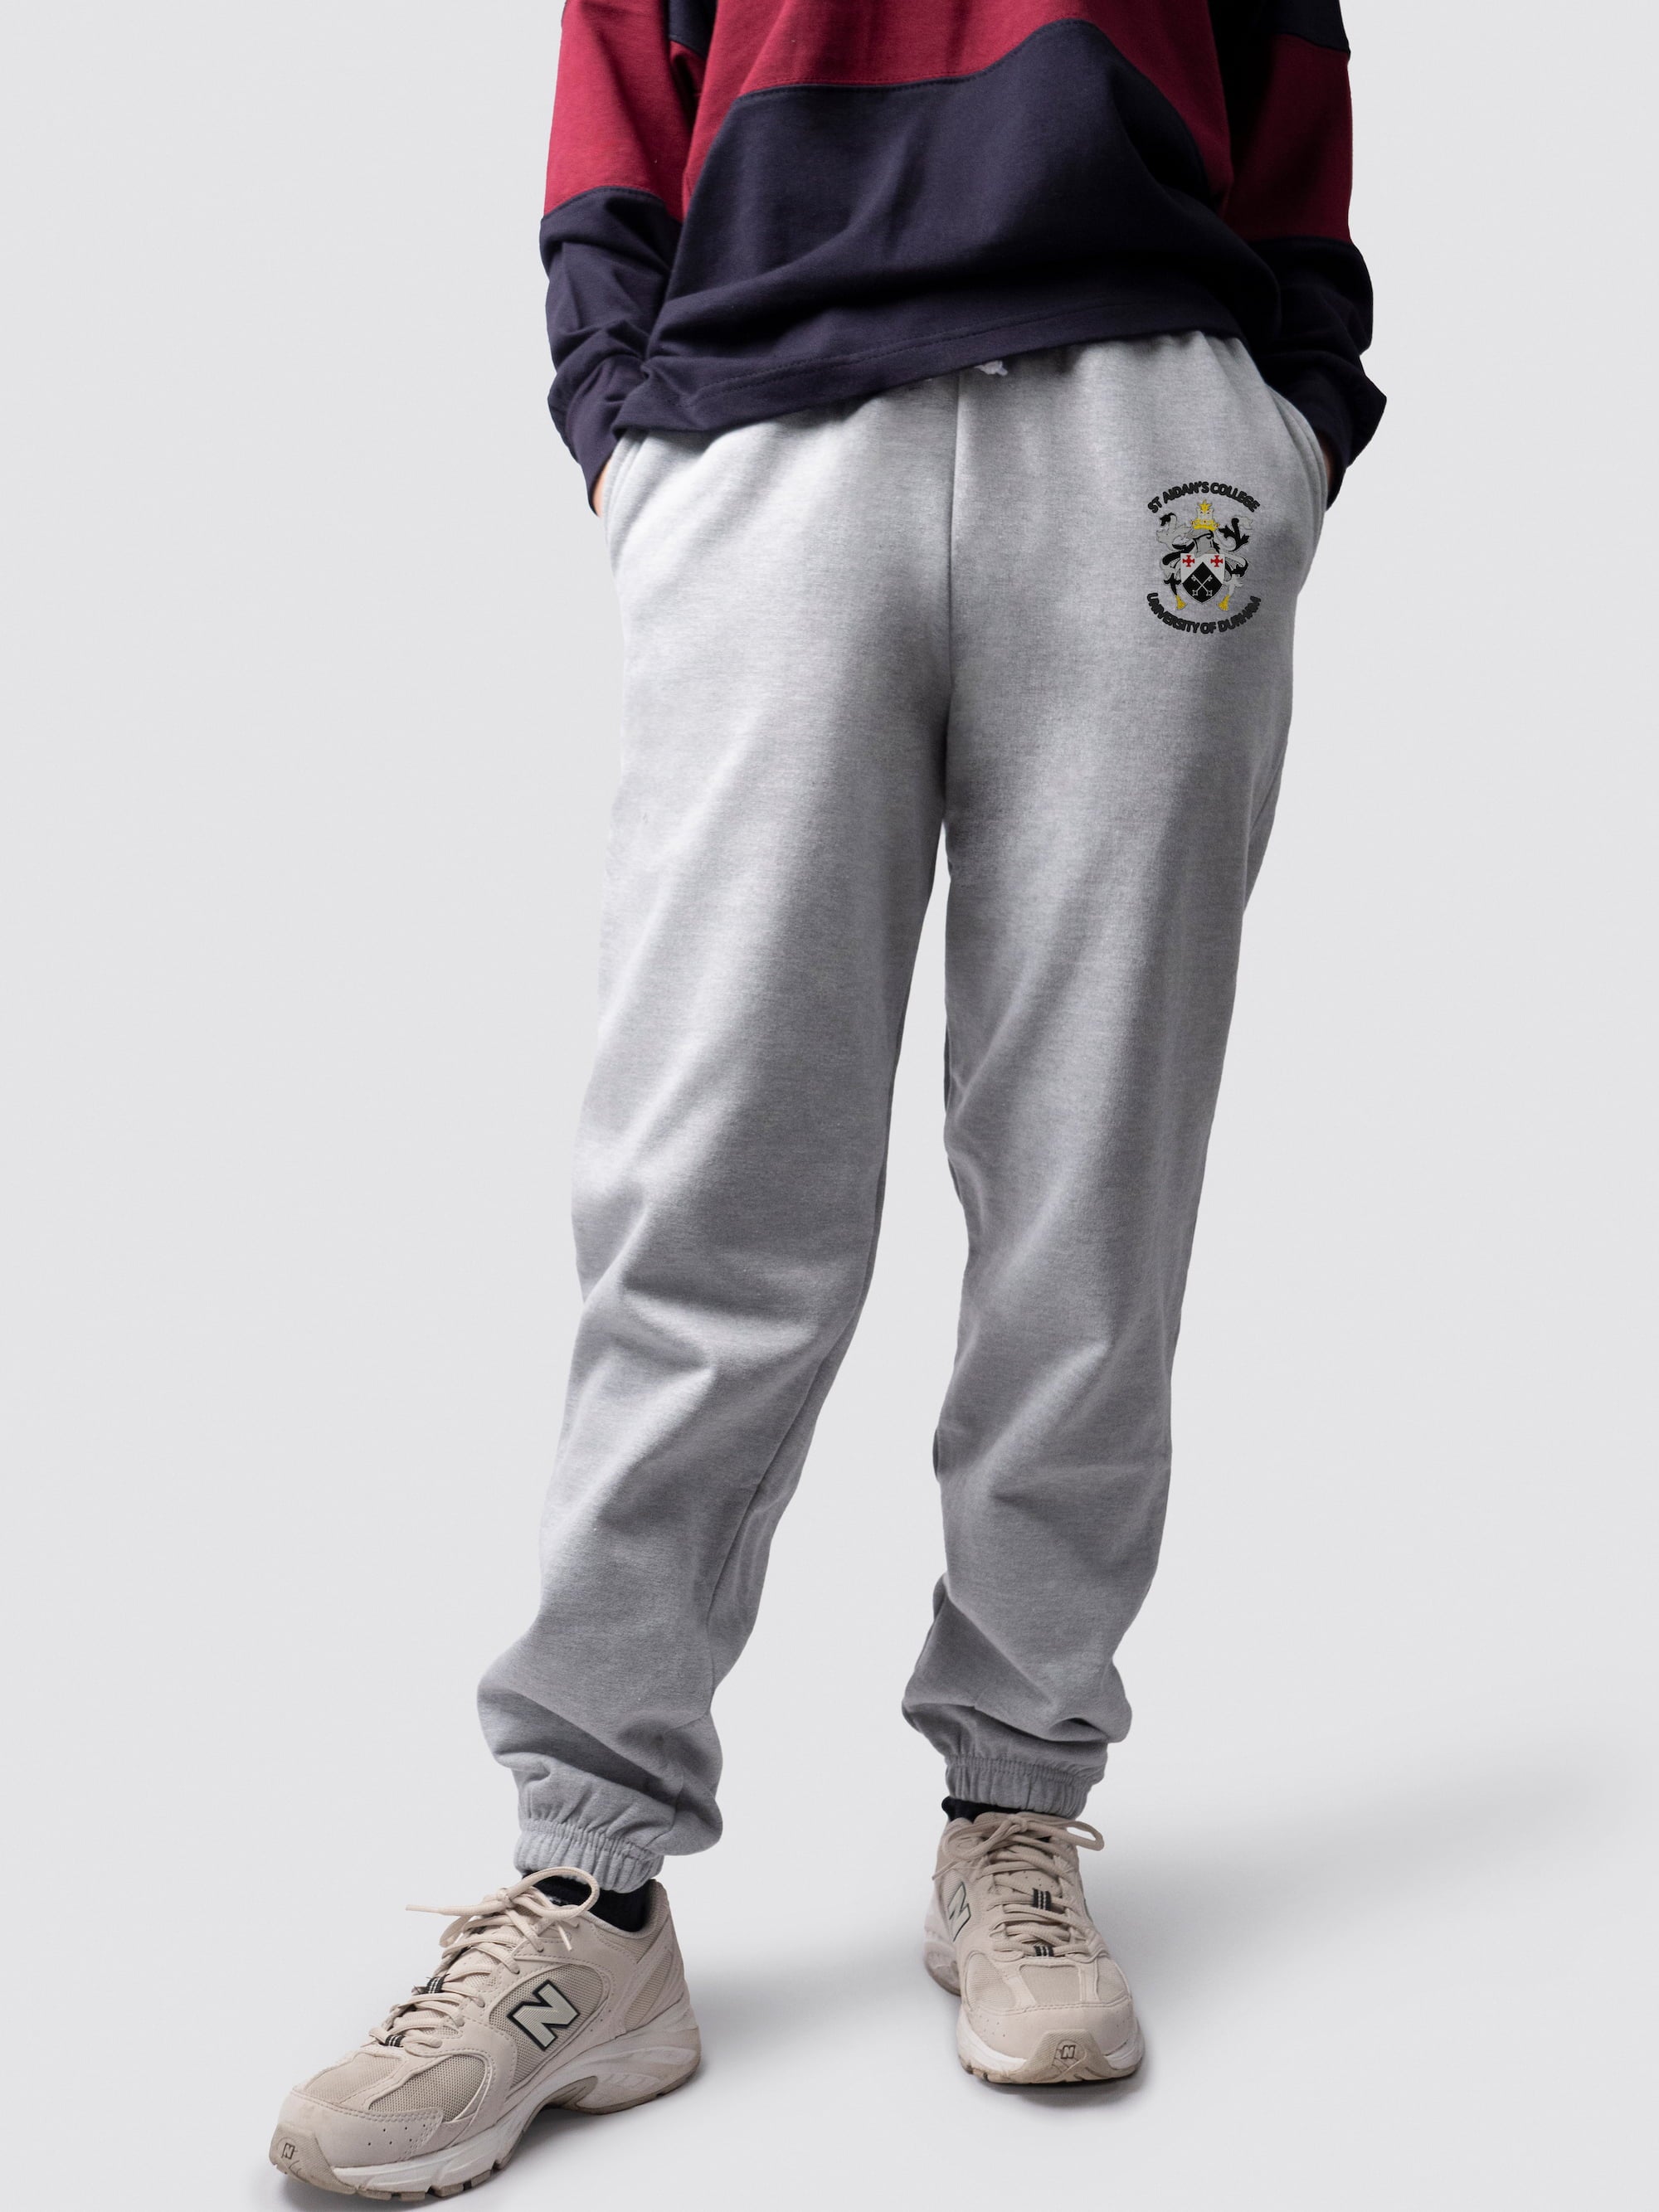 undergraduate cuffed sweatpants, made from soft cotton fabric, with St Aidan's logo